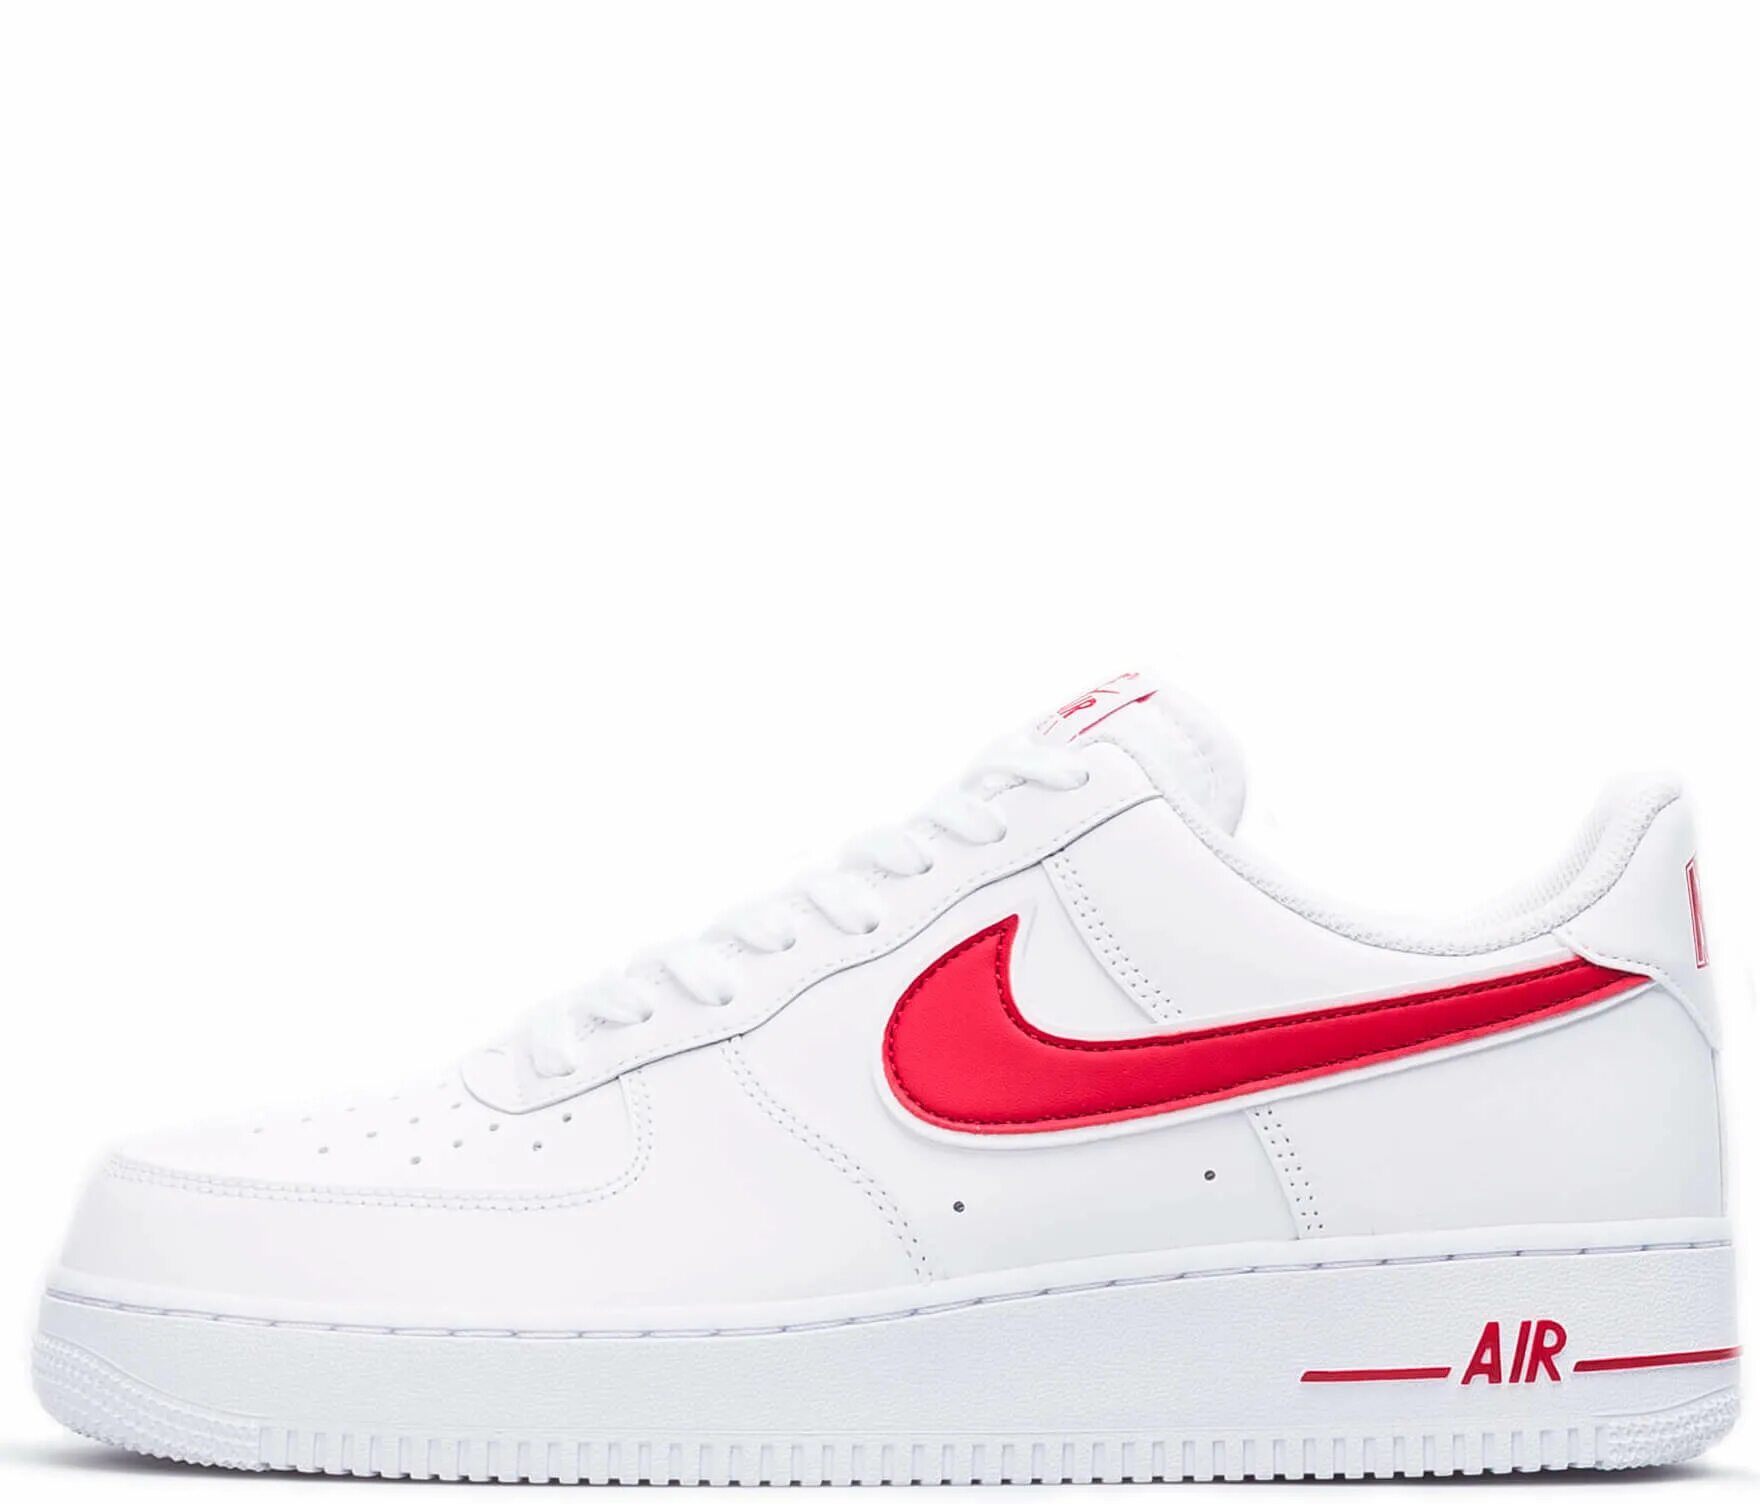 Nike Air Force 1 Low White Red. Nike Air Force 1 lv8 White/Red. Nike Air Force 1 White Red. Nike Air Force 1 lv8 White. Мужские кроссовки тольятти